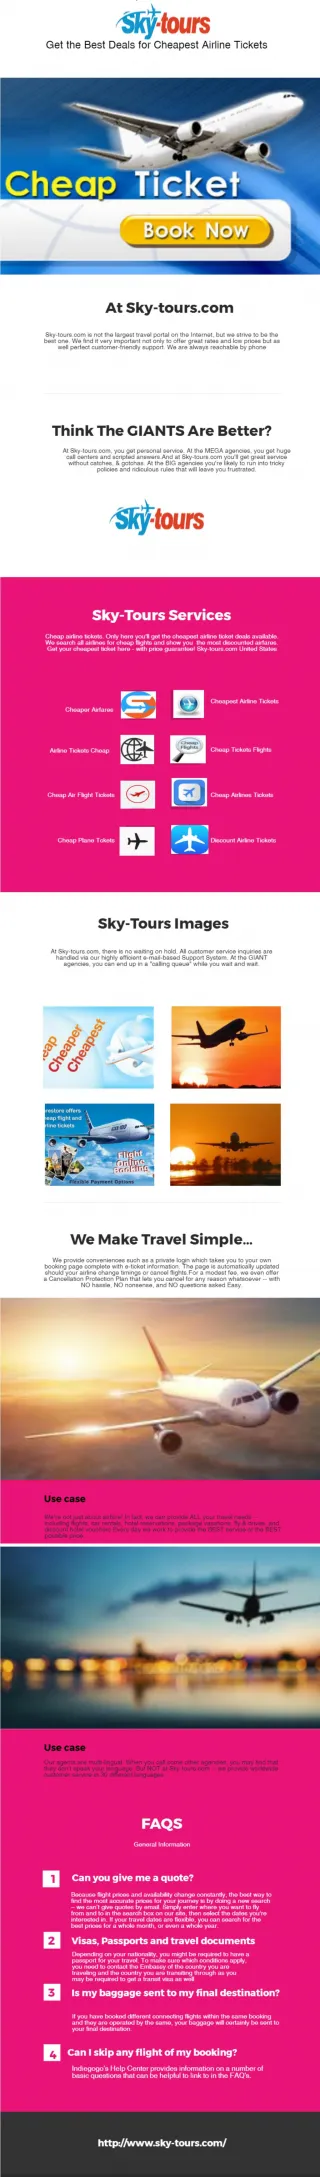 Get the Best Deals for Cheapest Airline Tickets